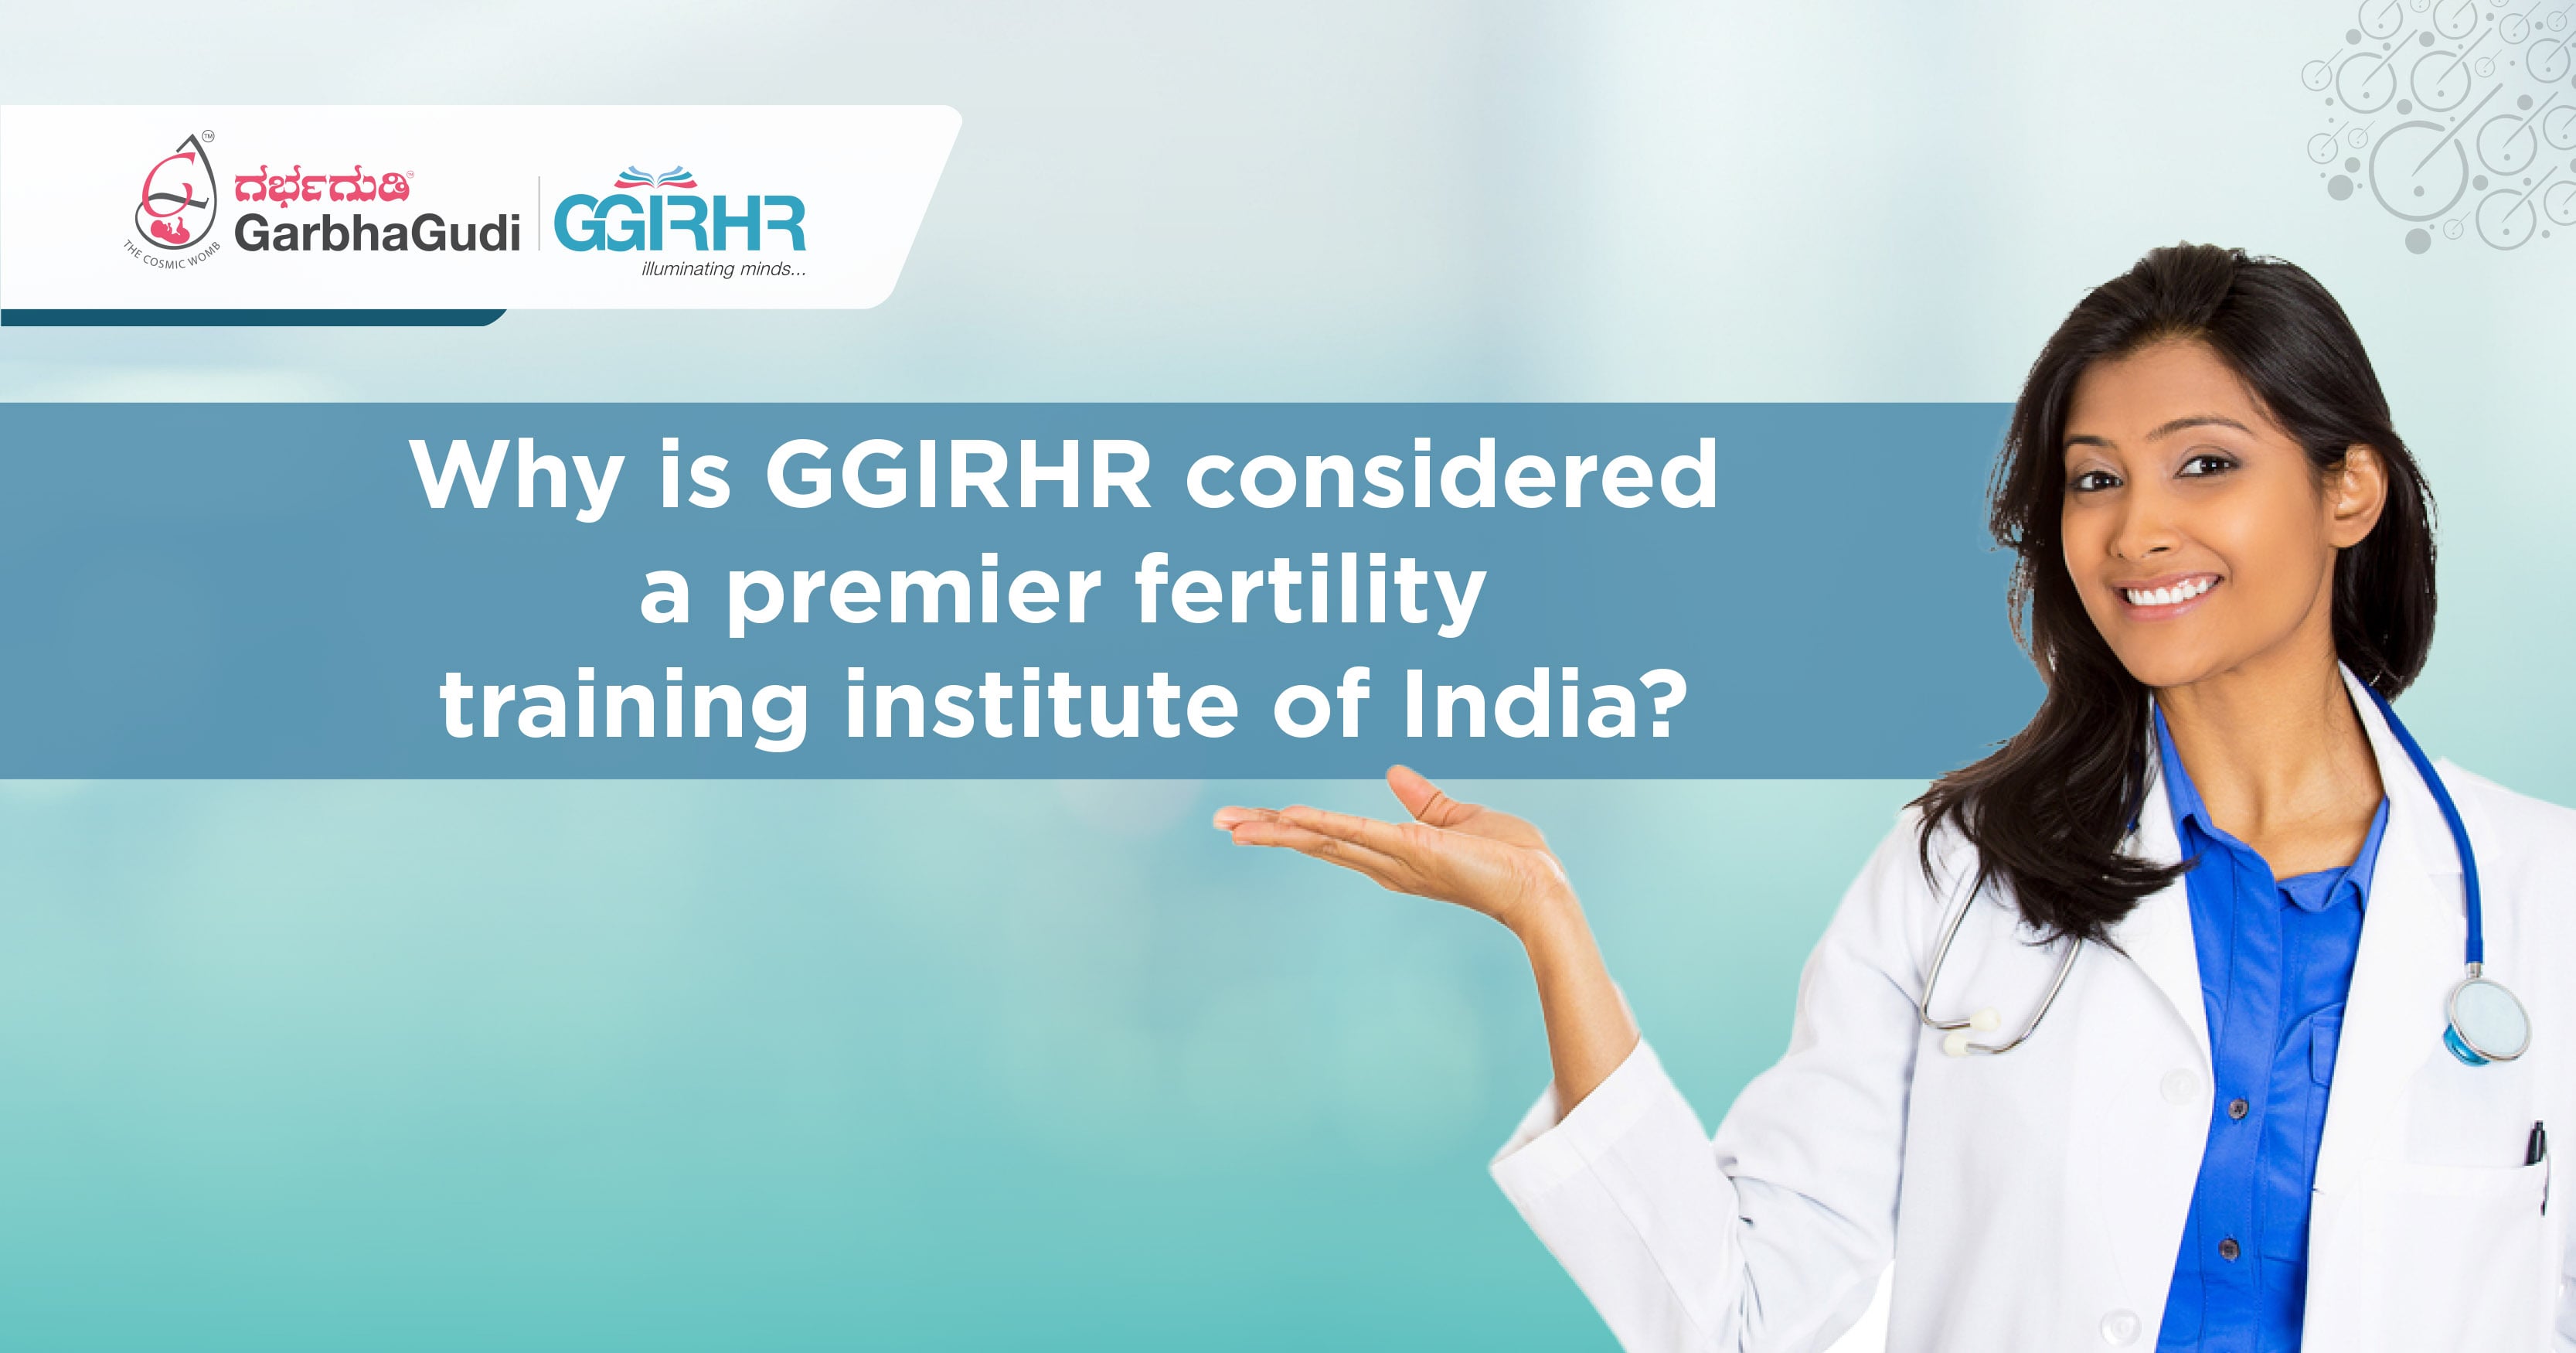 Why is GGIRHR considered a premier fertility training institute of India?